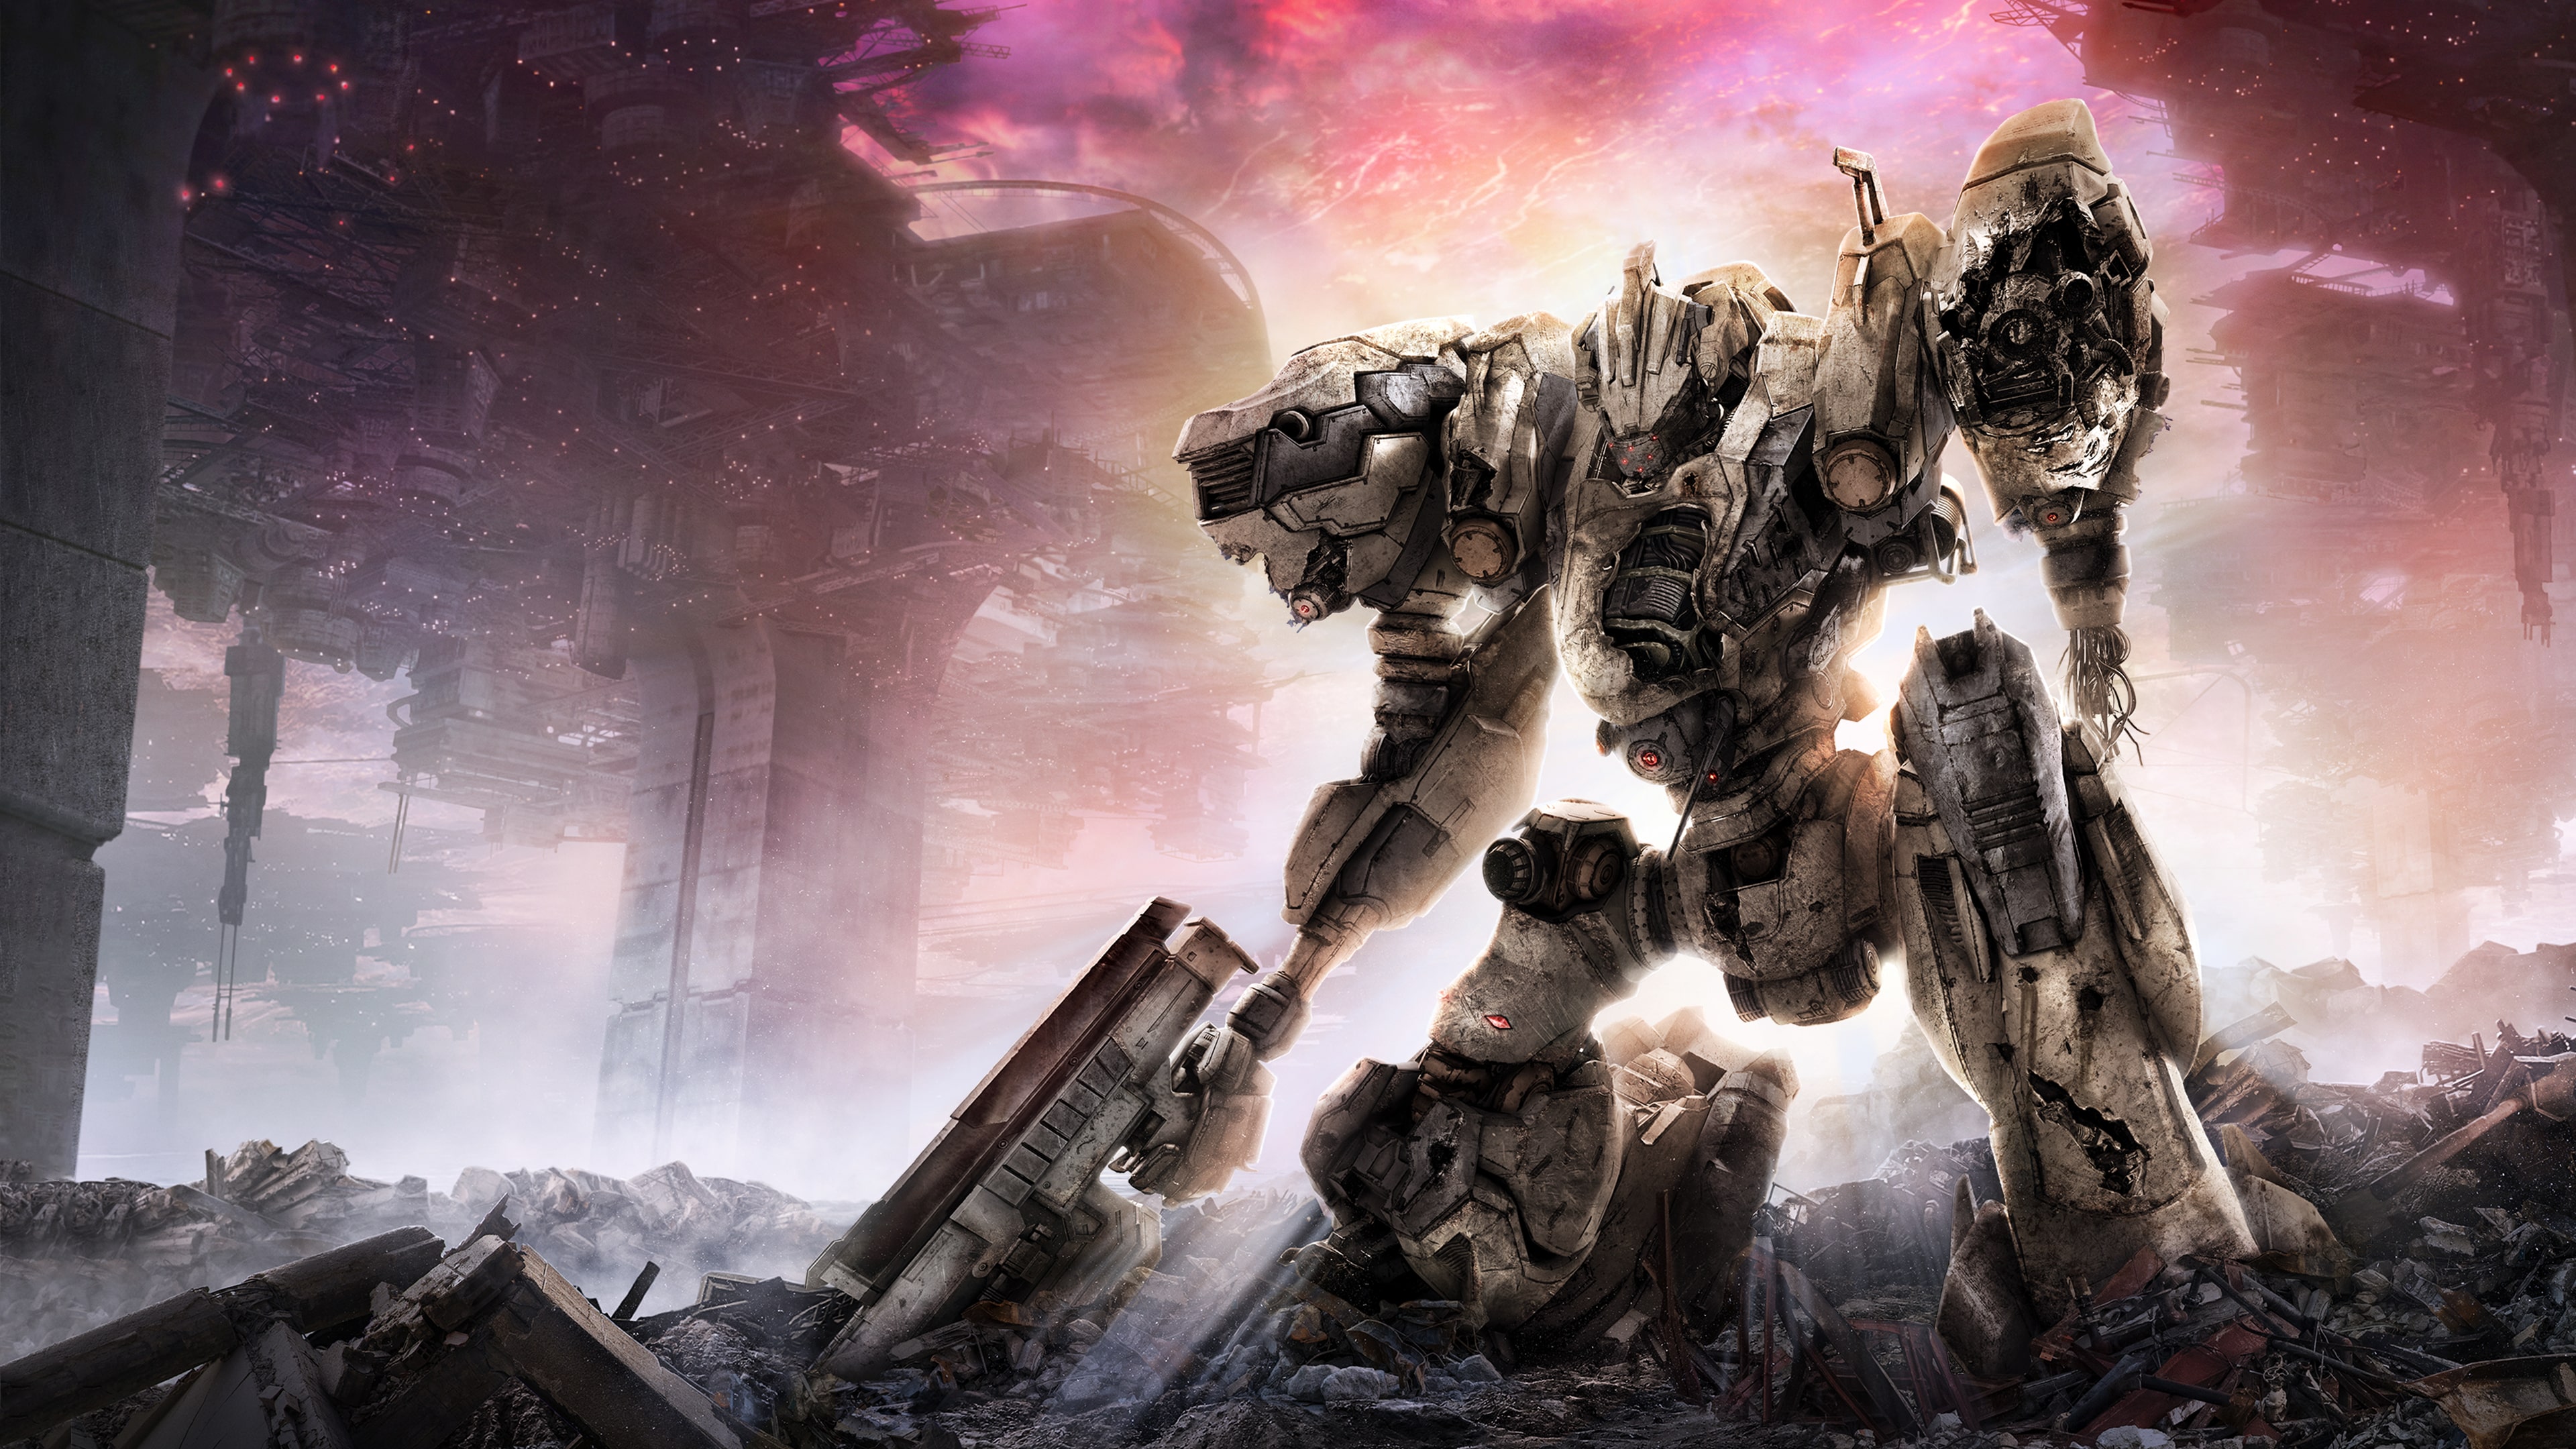 ARMORED CORE™ VI FIRES OF RUBICON™ PS4 y PS5